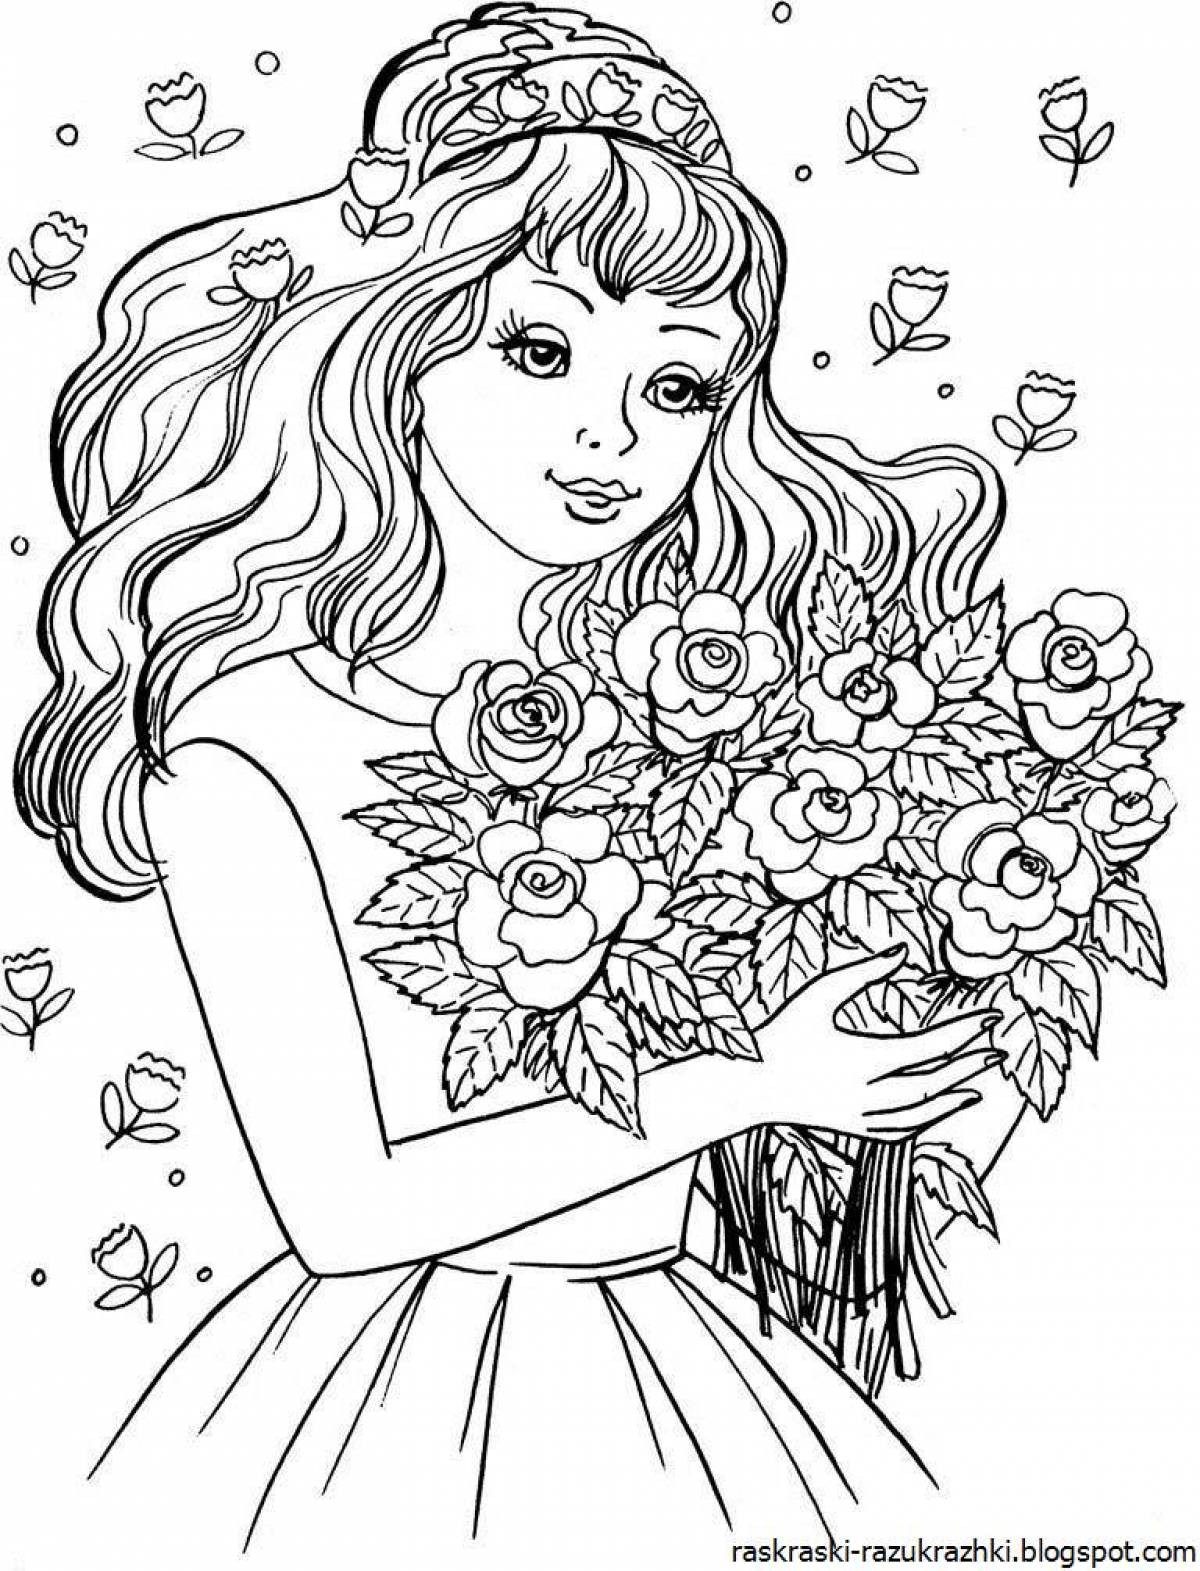 Dazzling coloring book for girls 10 years old